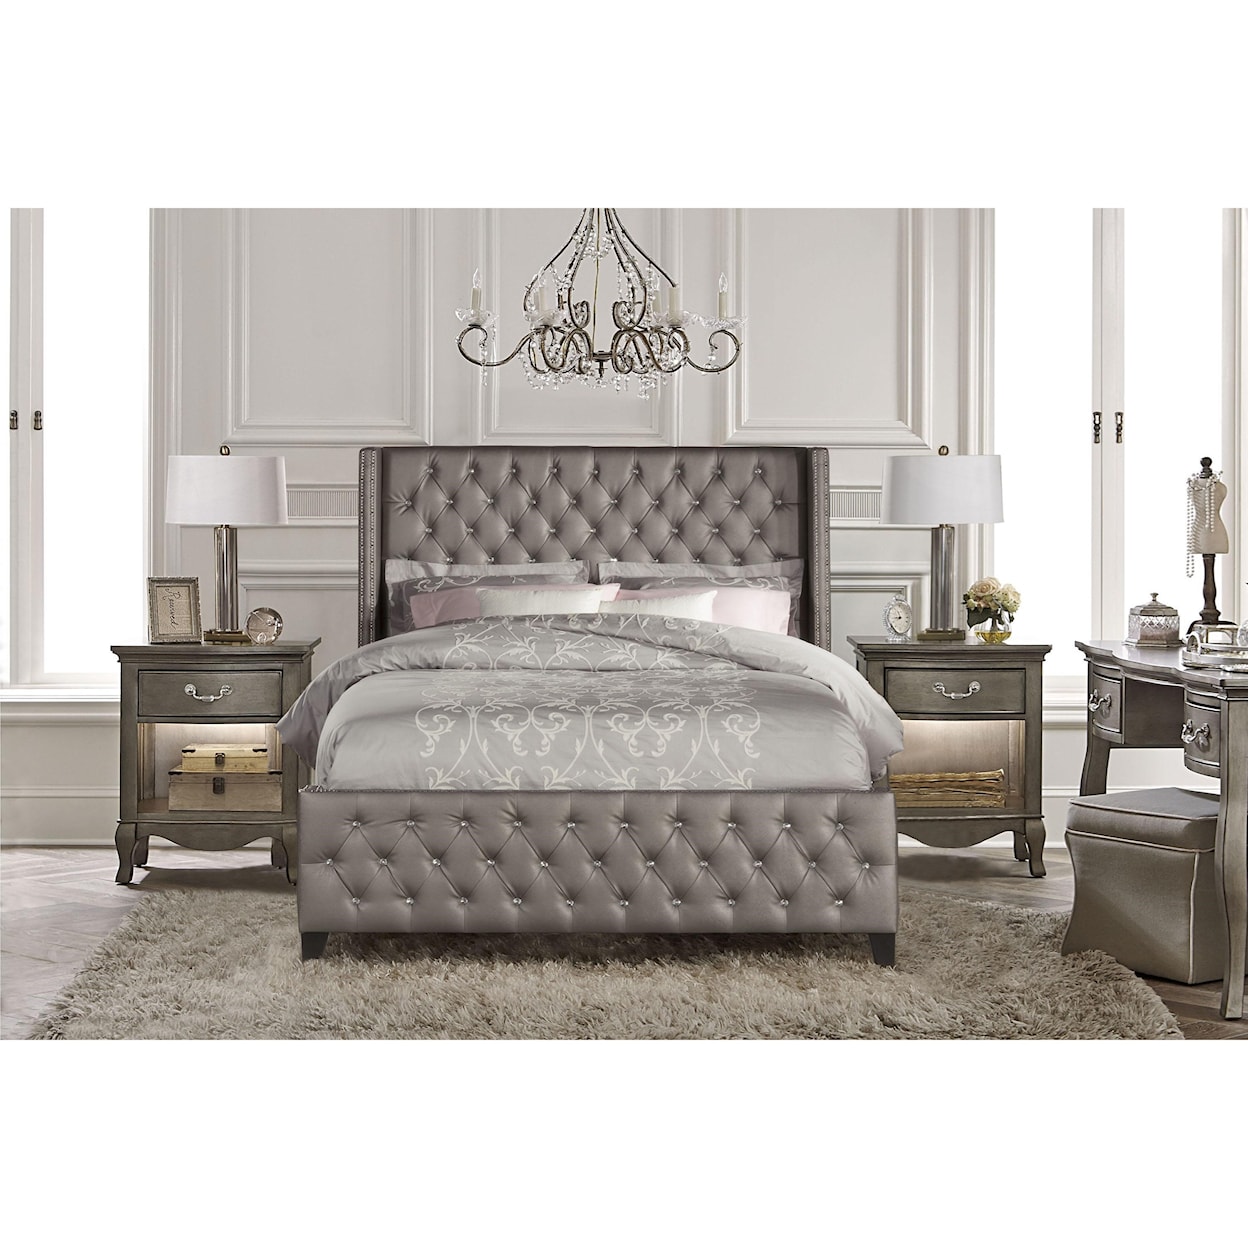 Hillsdale Memphis King Queen Bed Set with Rails